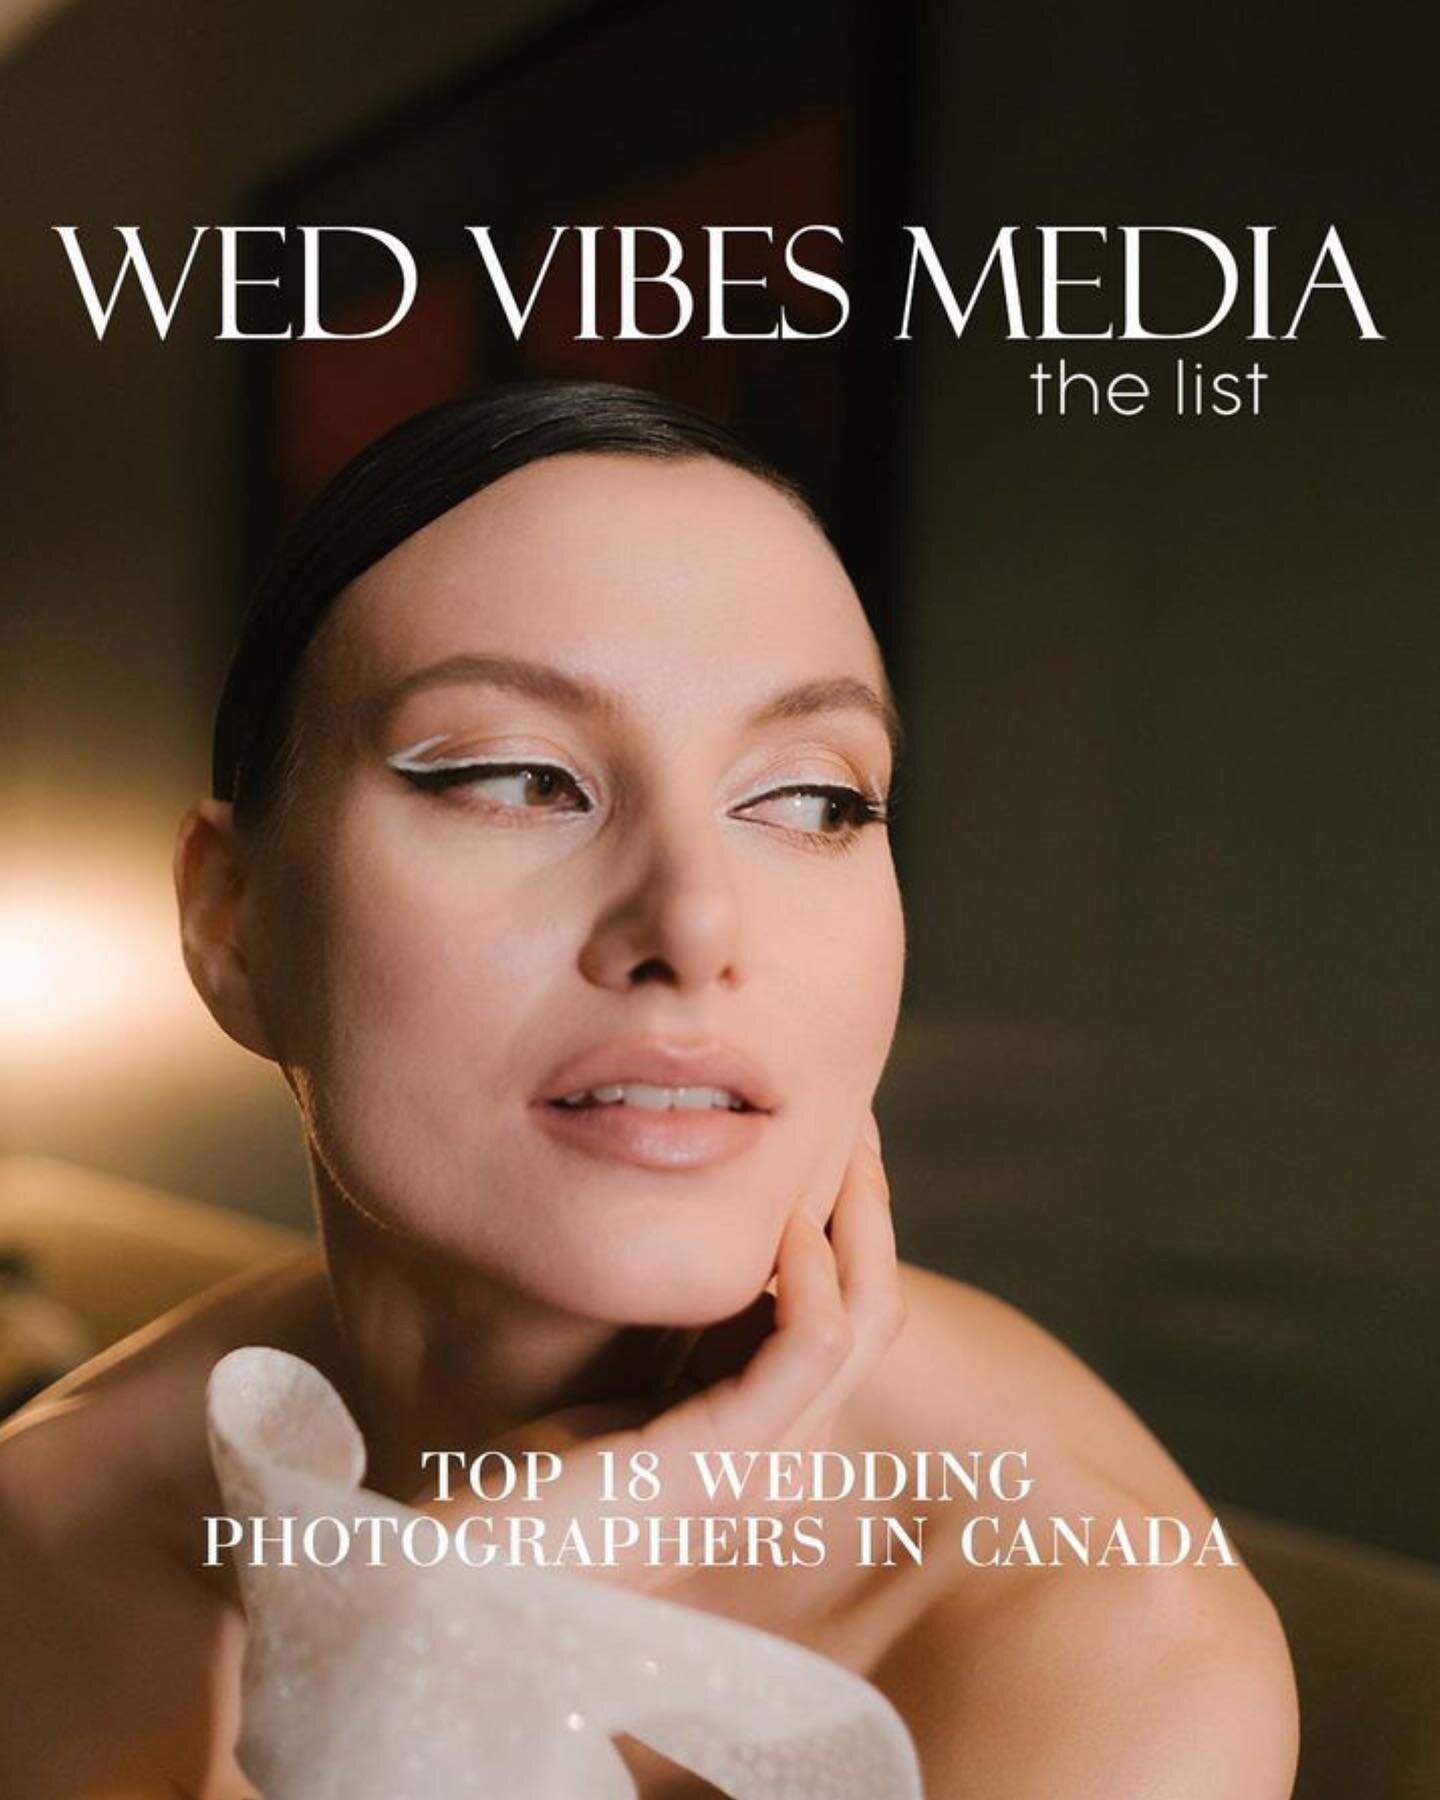 Thrilled to stand alongside incredibly talented artists on the Wed Vibes list, a recognition among the best wedding photographers in Canada. Honored and ready to capture more love stories! Merci @wed_vibes